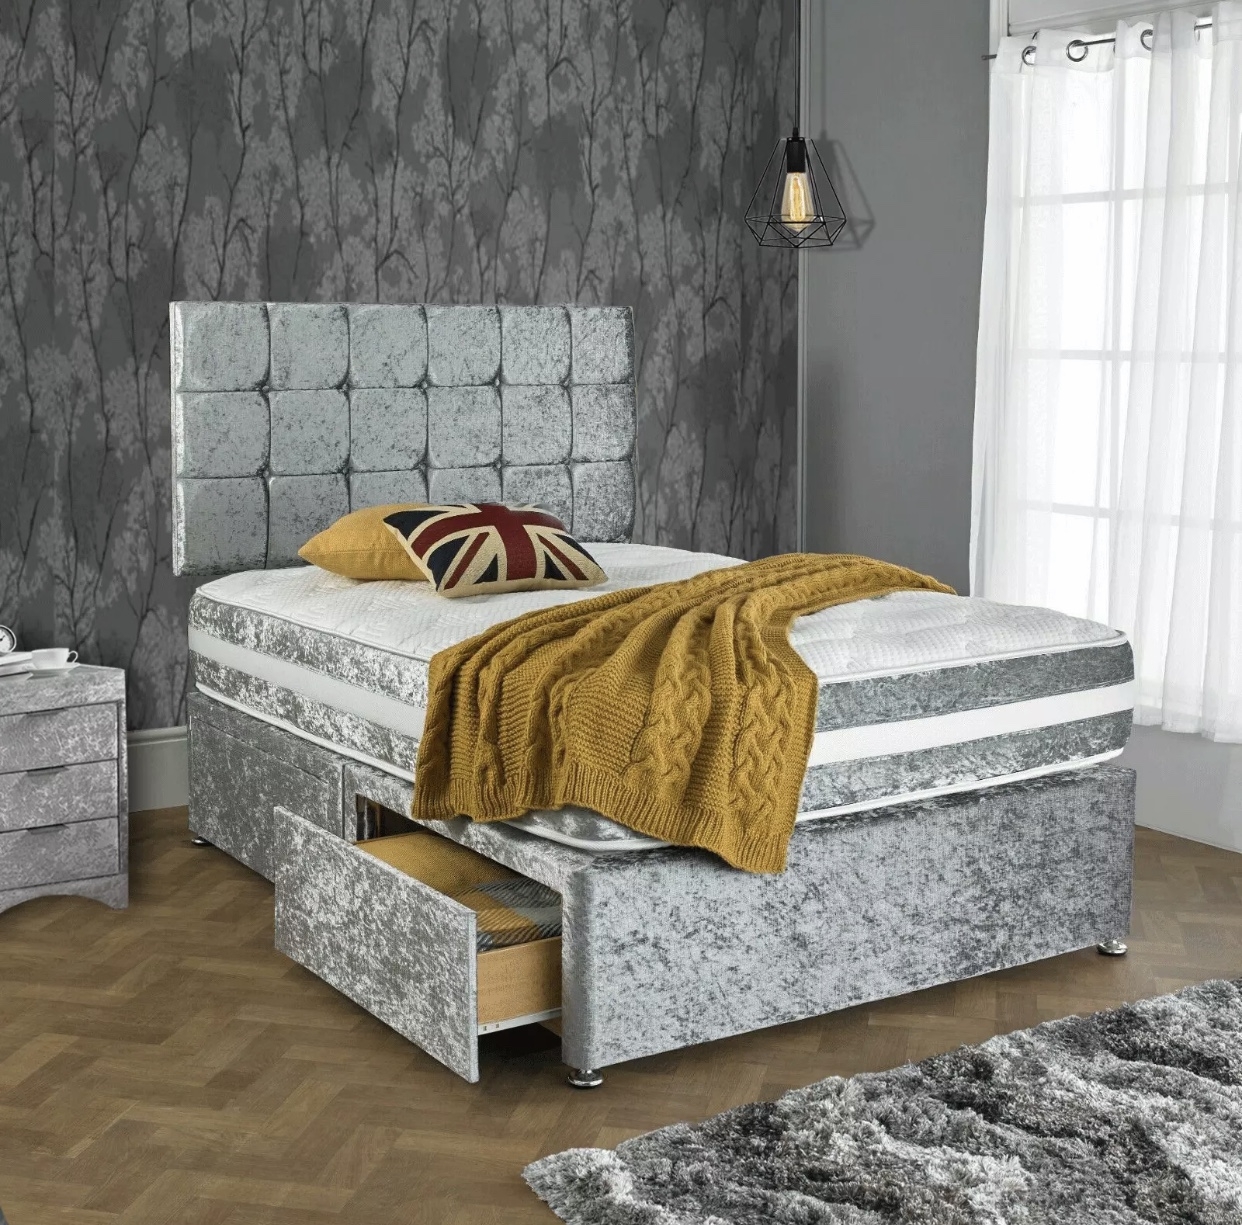 BedsDivans – Eli Crushed Velvet Divan Bed – Silver – Single, Small Double, Double, King & Super King Available – Optional Headboard & Mattress